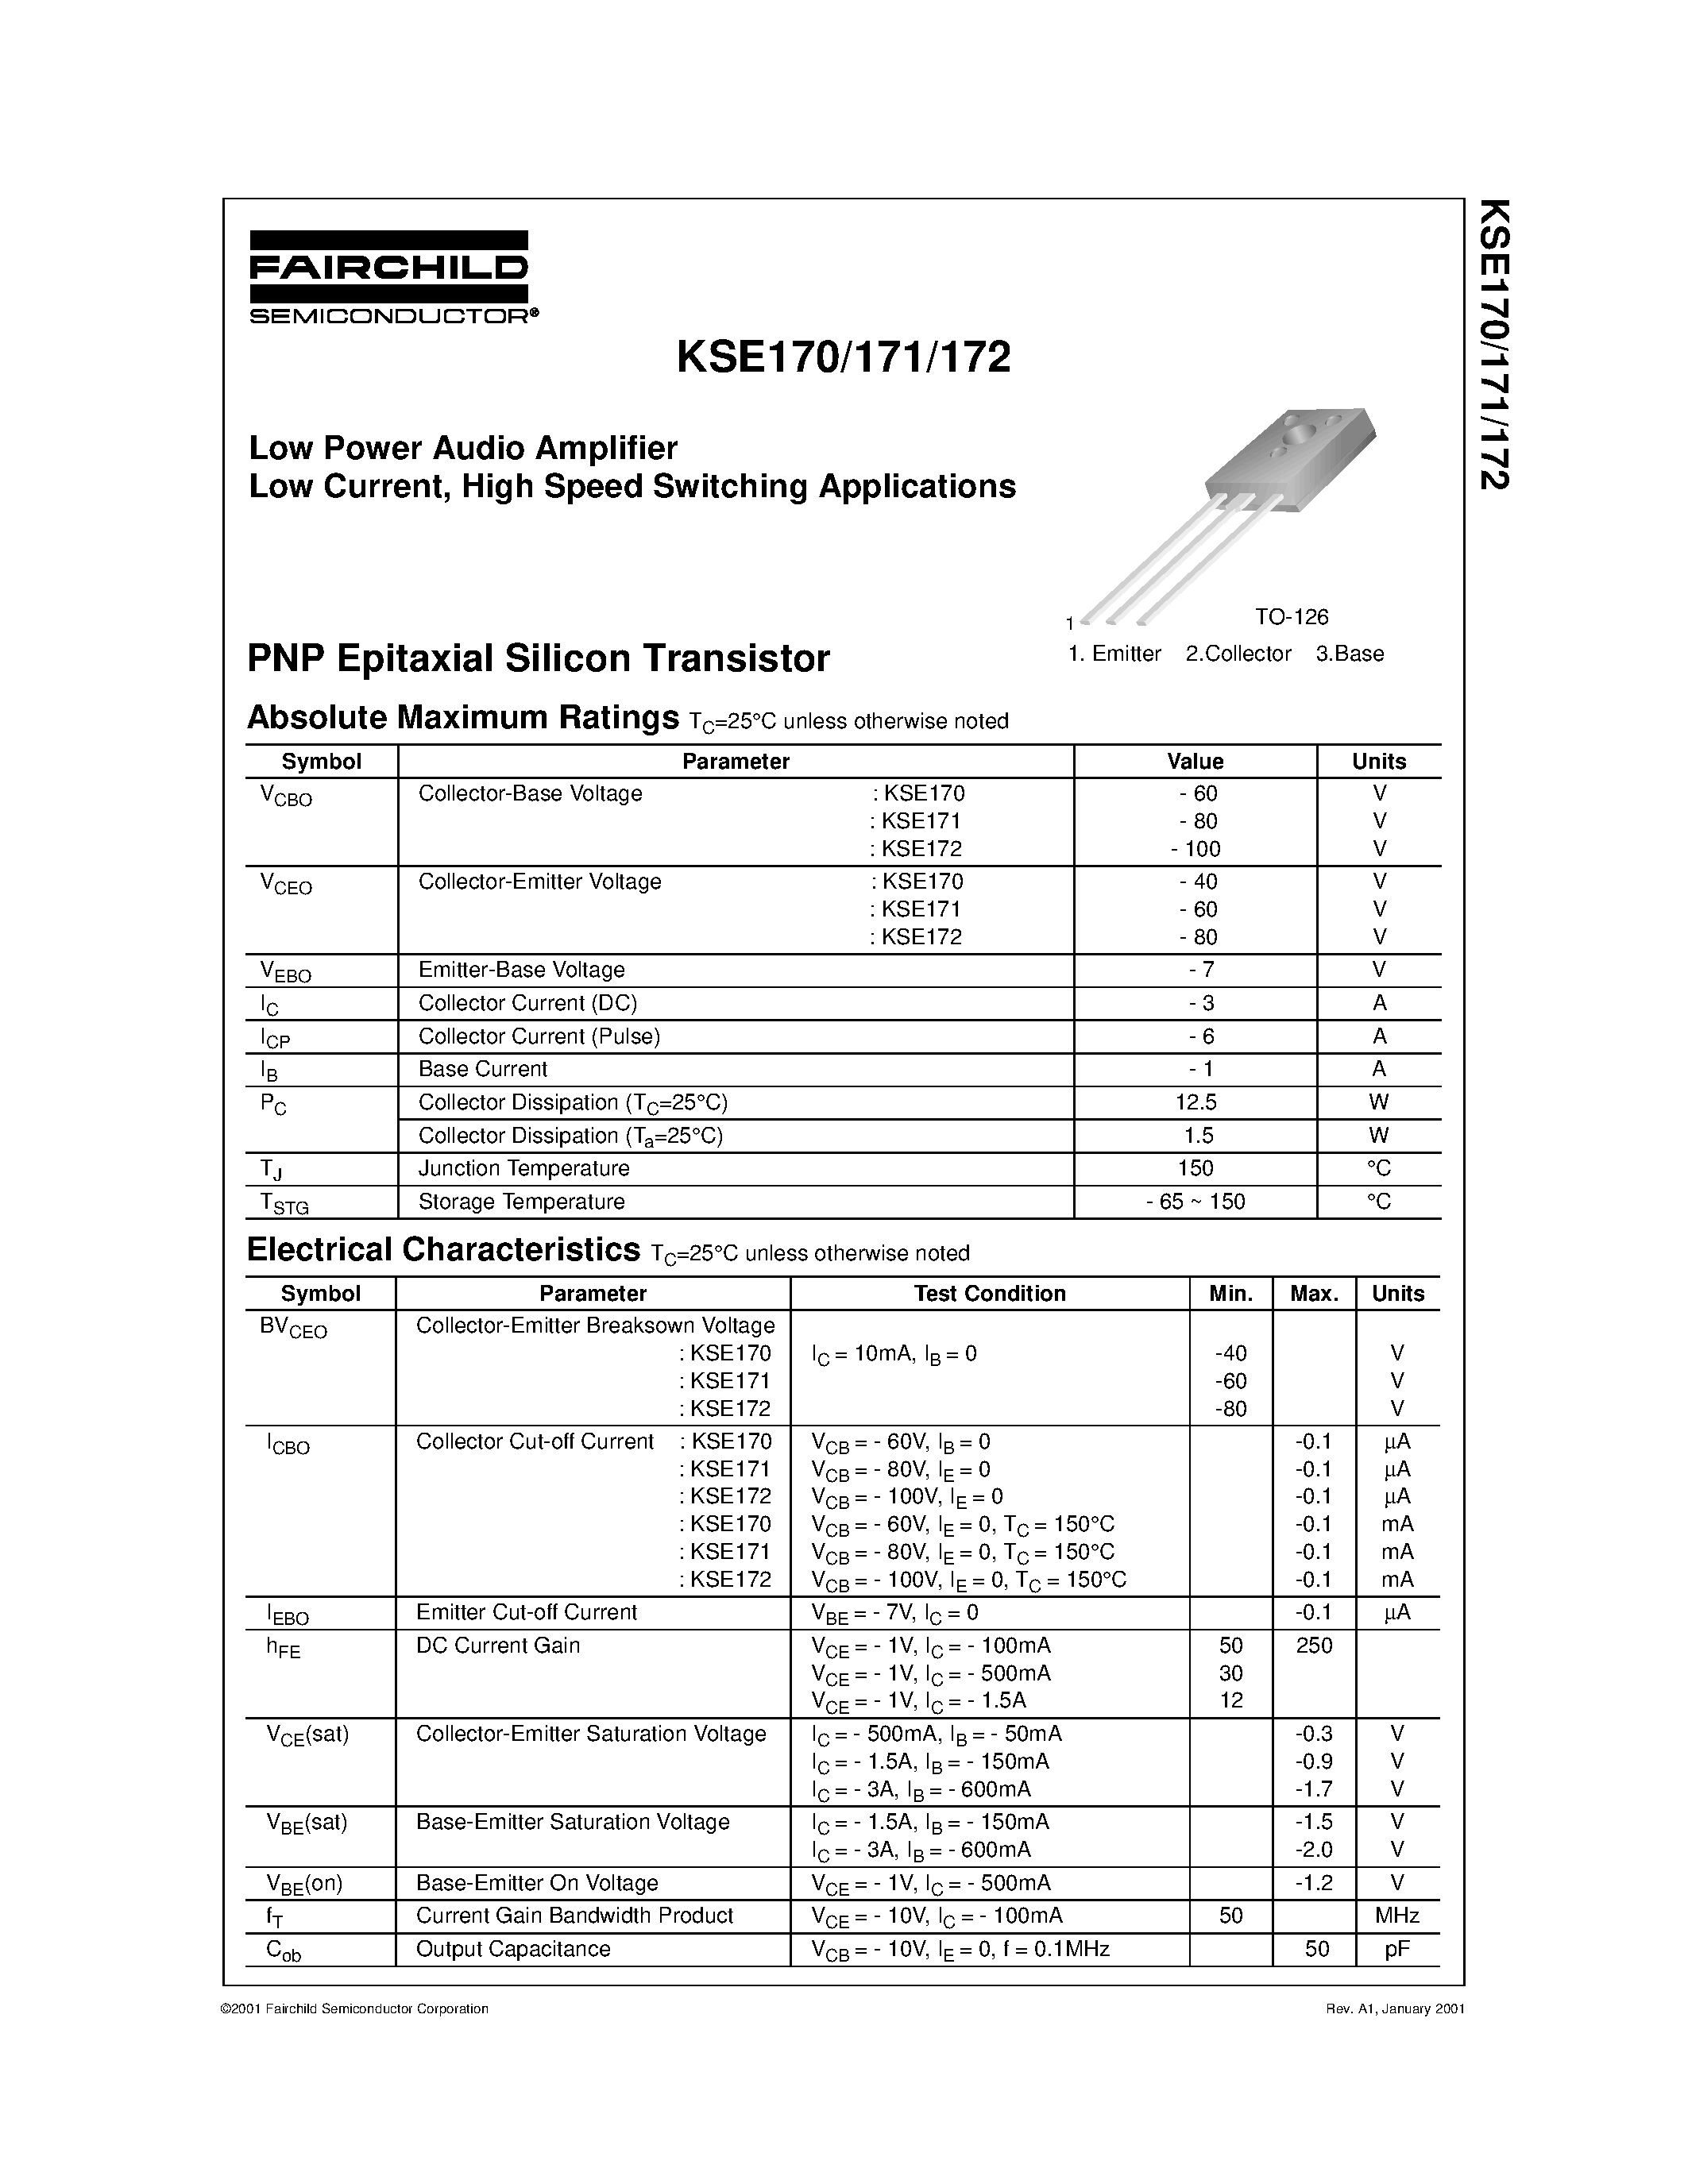 Datasheet KSE172 - Low Power Audio Amplifier Low Current/ High Speed Switching Applications page 1